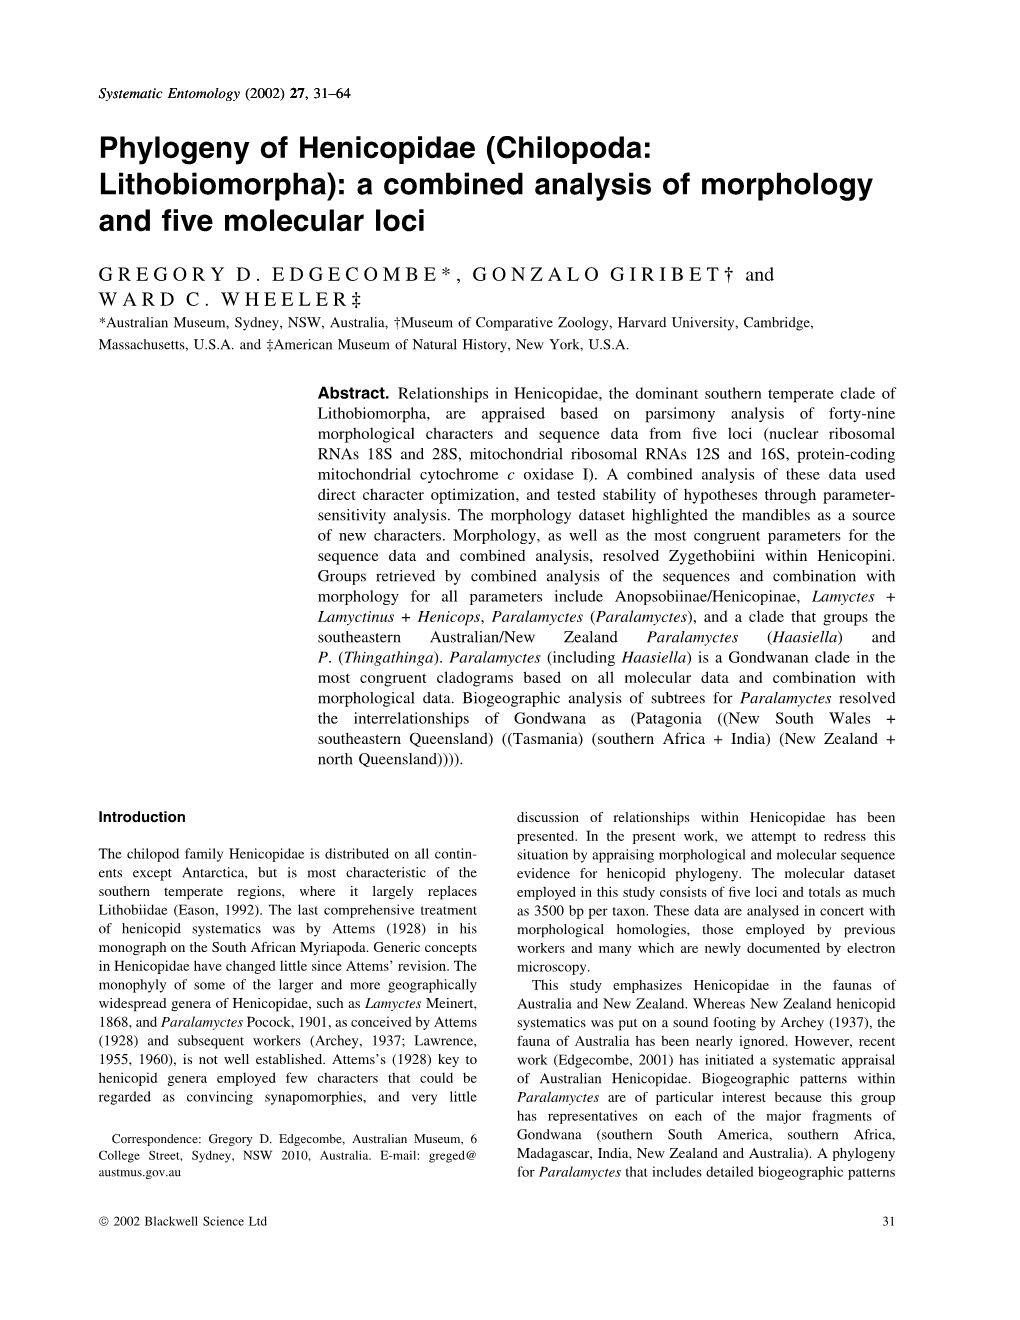 A Combined Analysis of Morphology and Five Molecular Loci